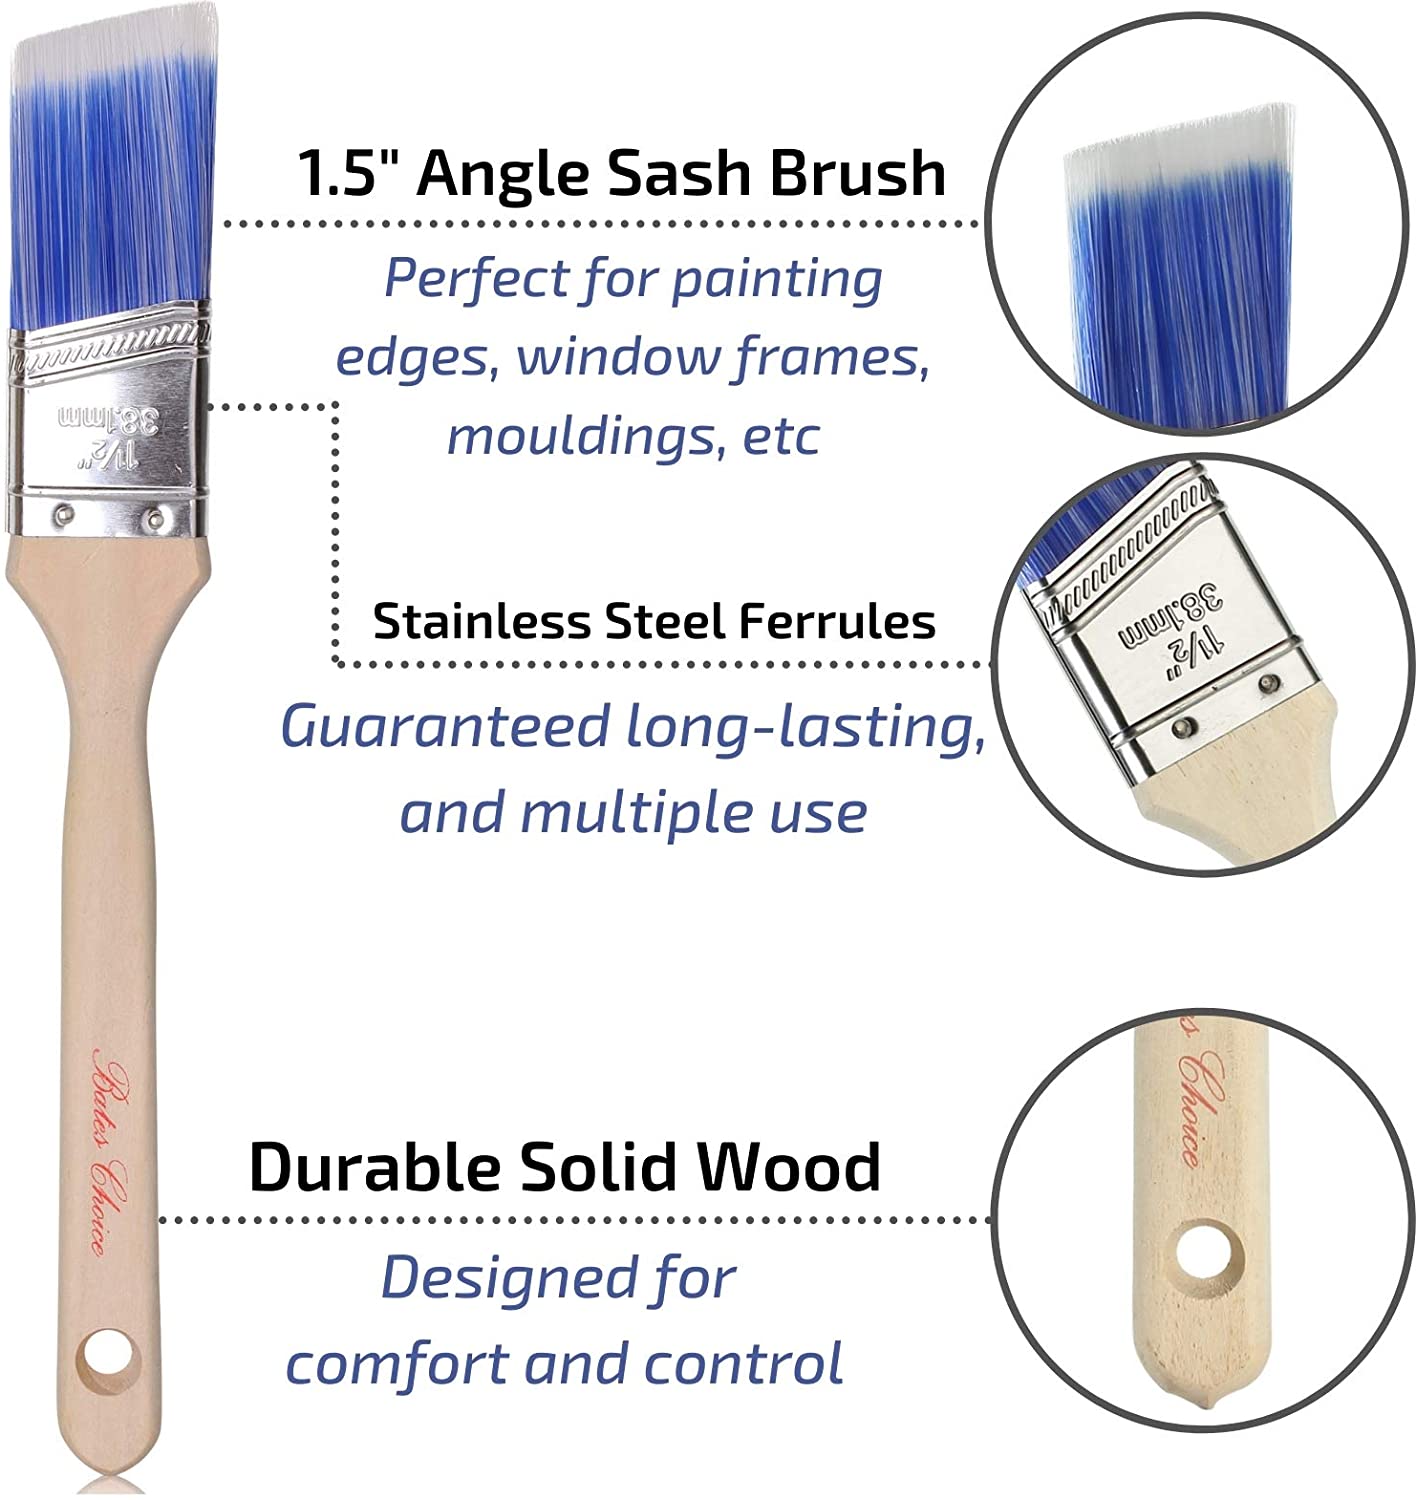 Bates Paint Brushes - 5 Pieces 3, 2.5, 2, 1.5 and 1-Inch, Paint Brushes for Wall